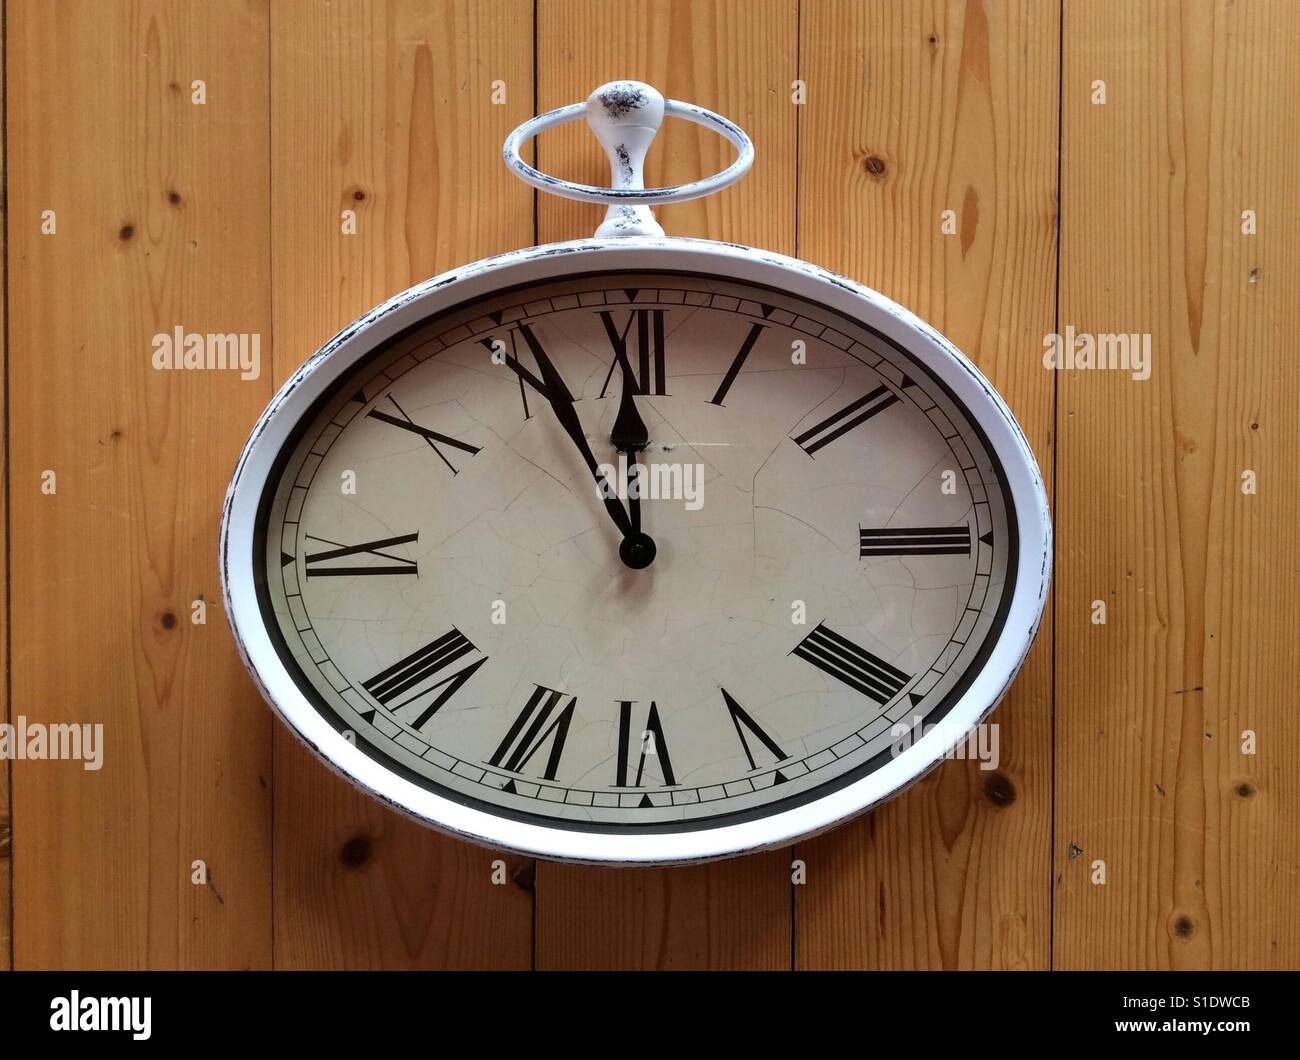 Vintage clock at 5 minutes to 12 Stock Photo